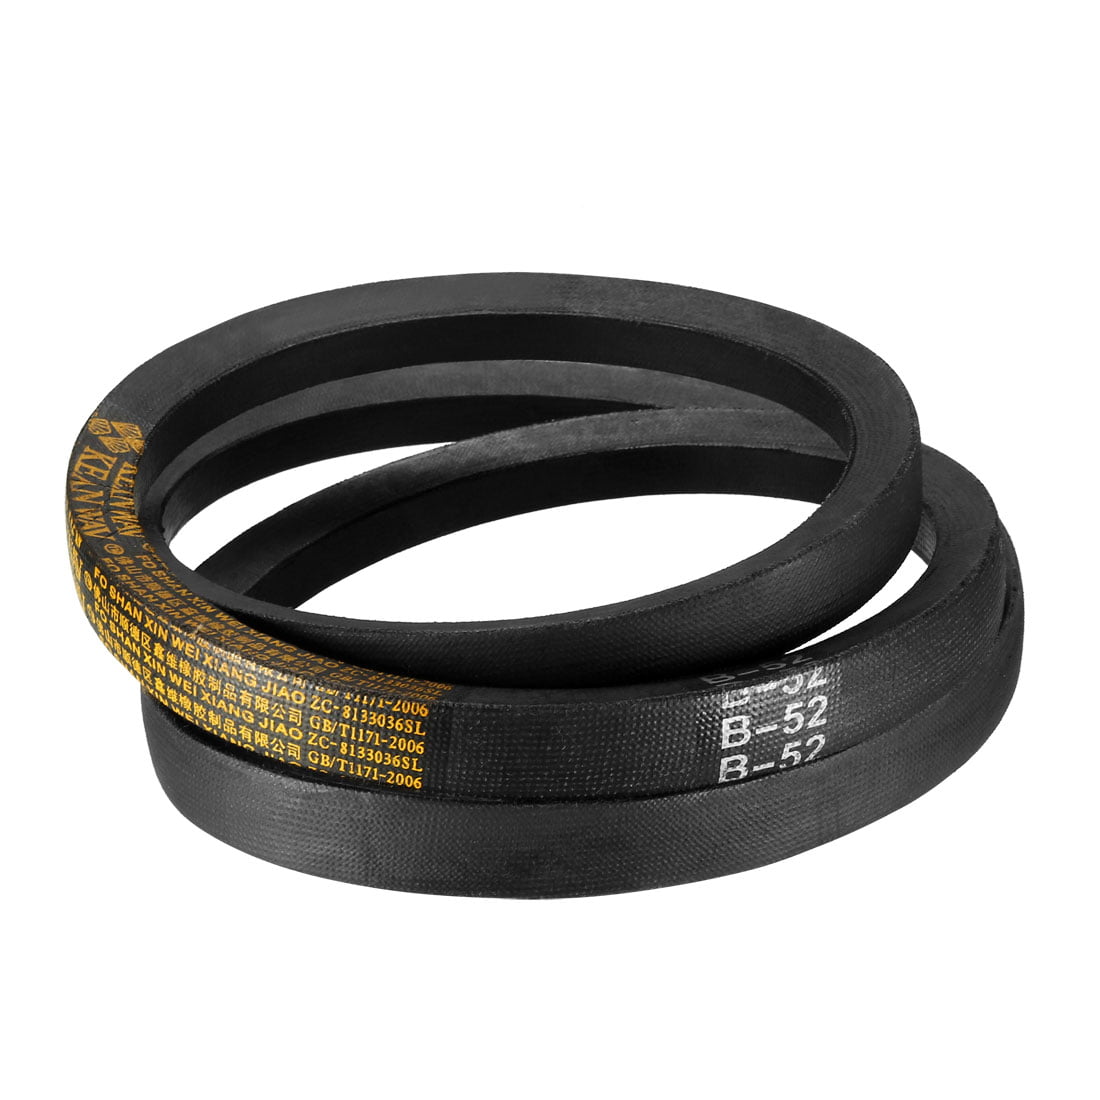 Uxcell a12011000ux0055 Black Inner Girth 40.5 Rubber B Type Wedge Rope Vee Belt Rubber 